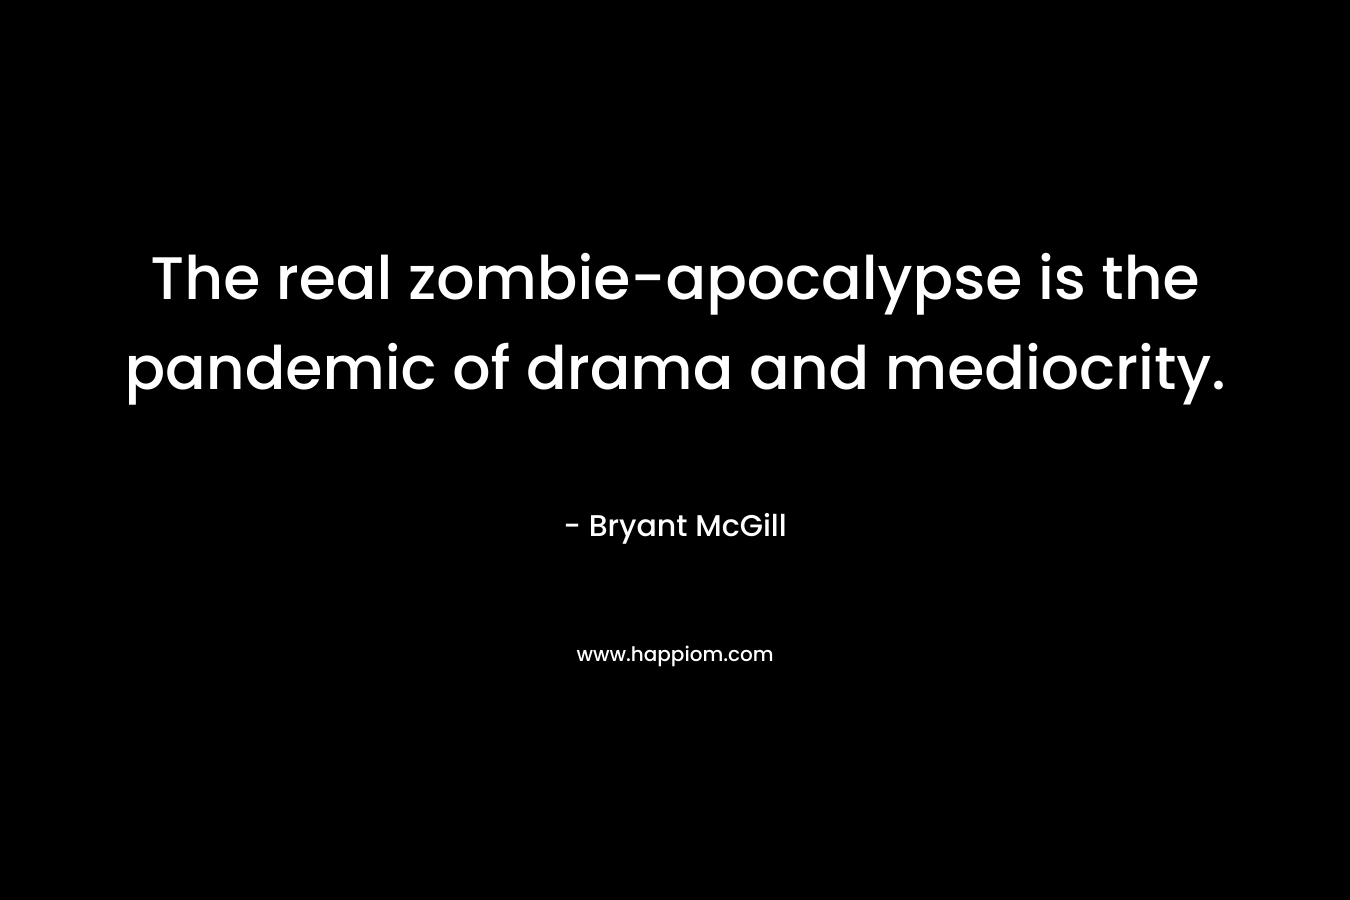 The real zombie-apocalypse is the pandemic of drama and mediocrity.